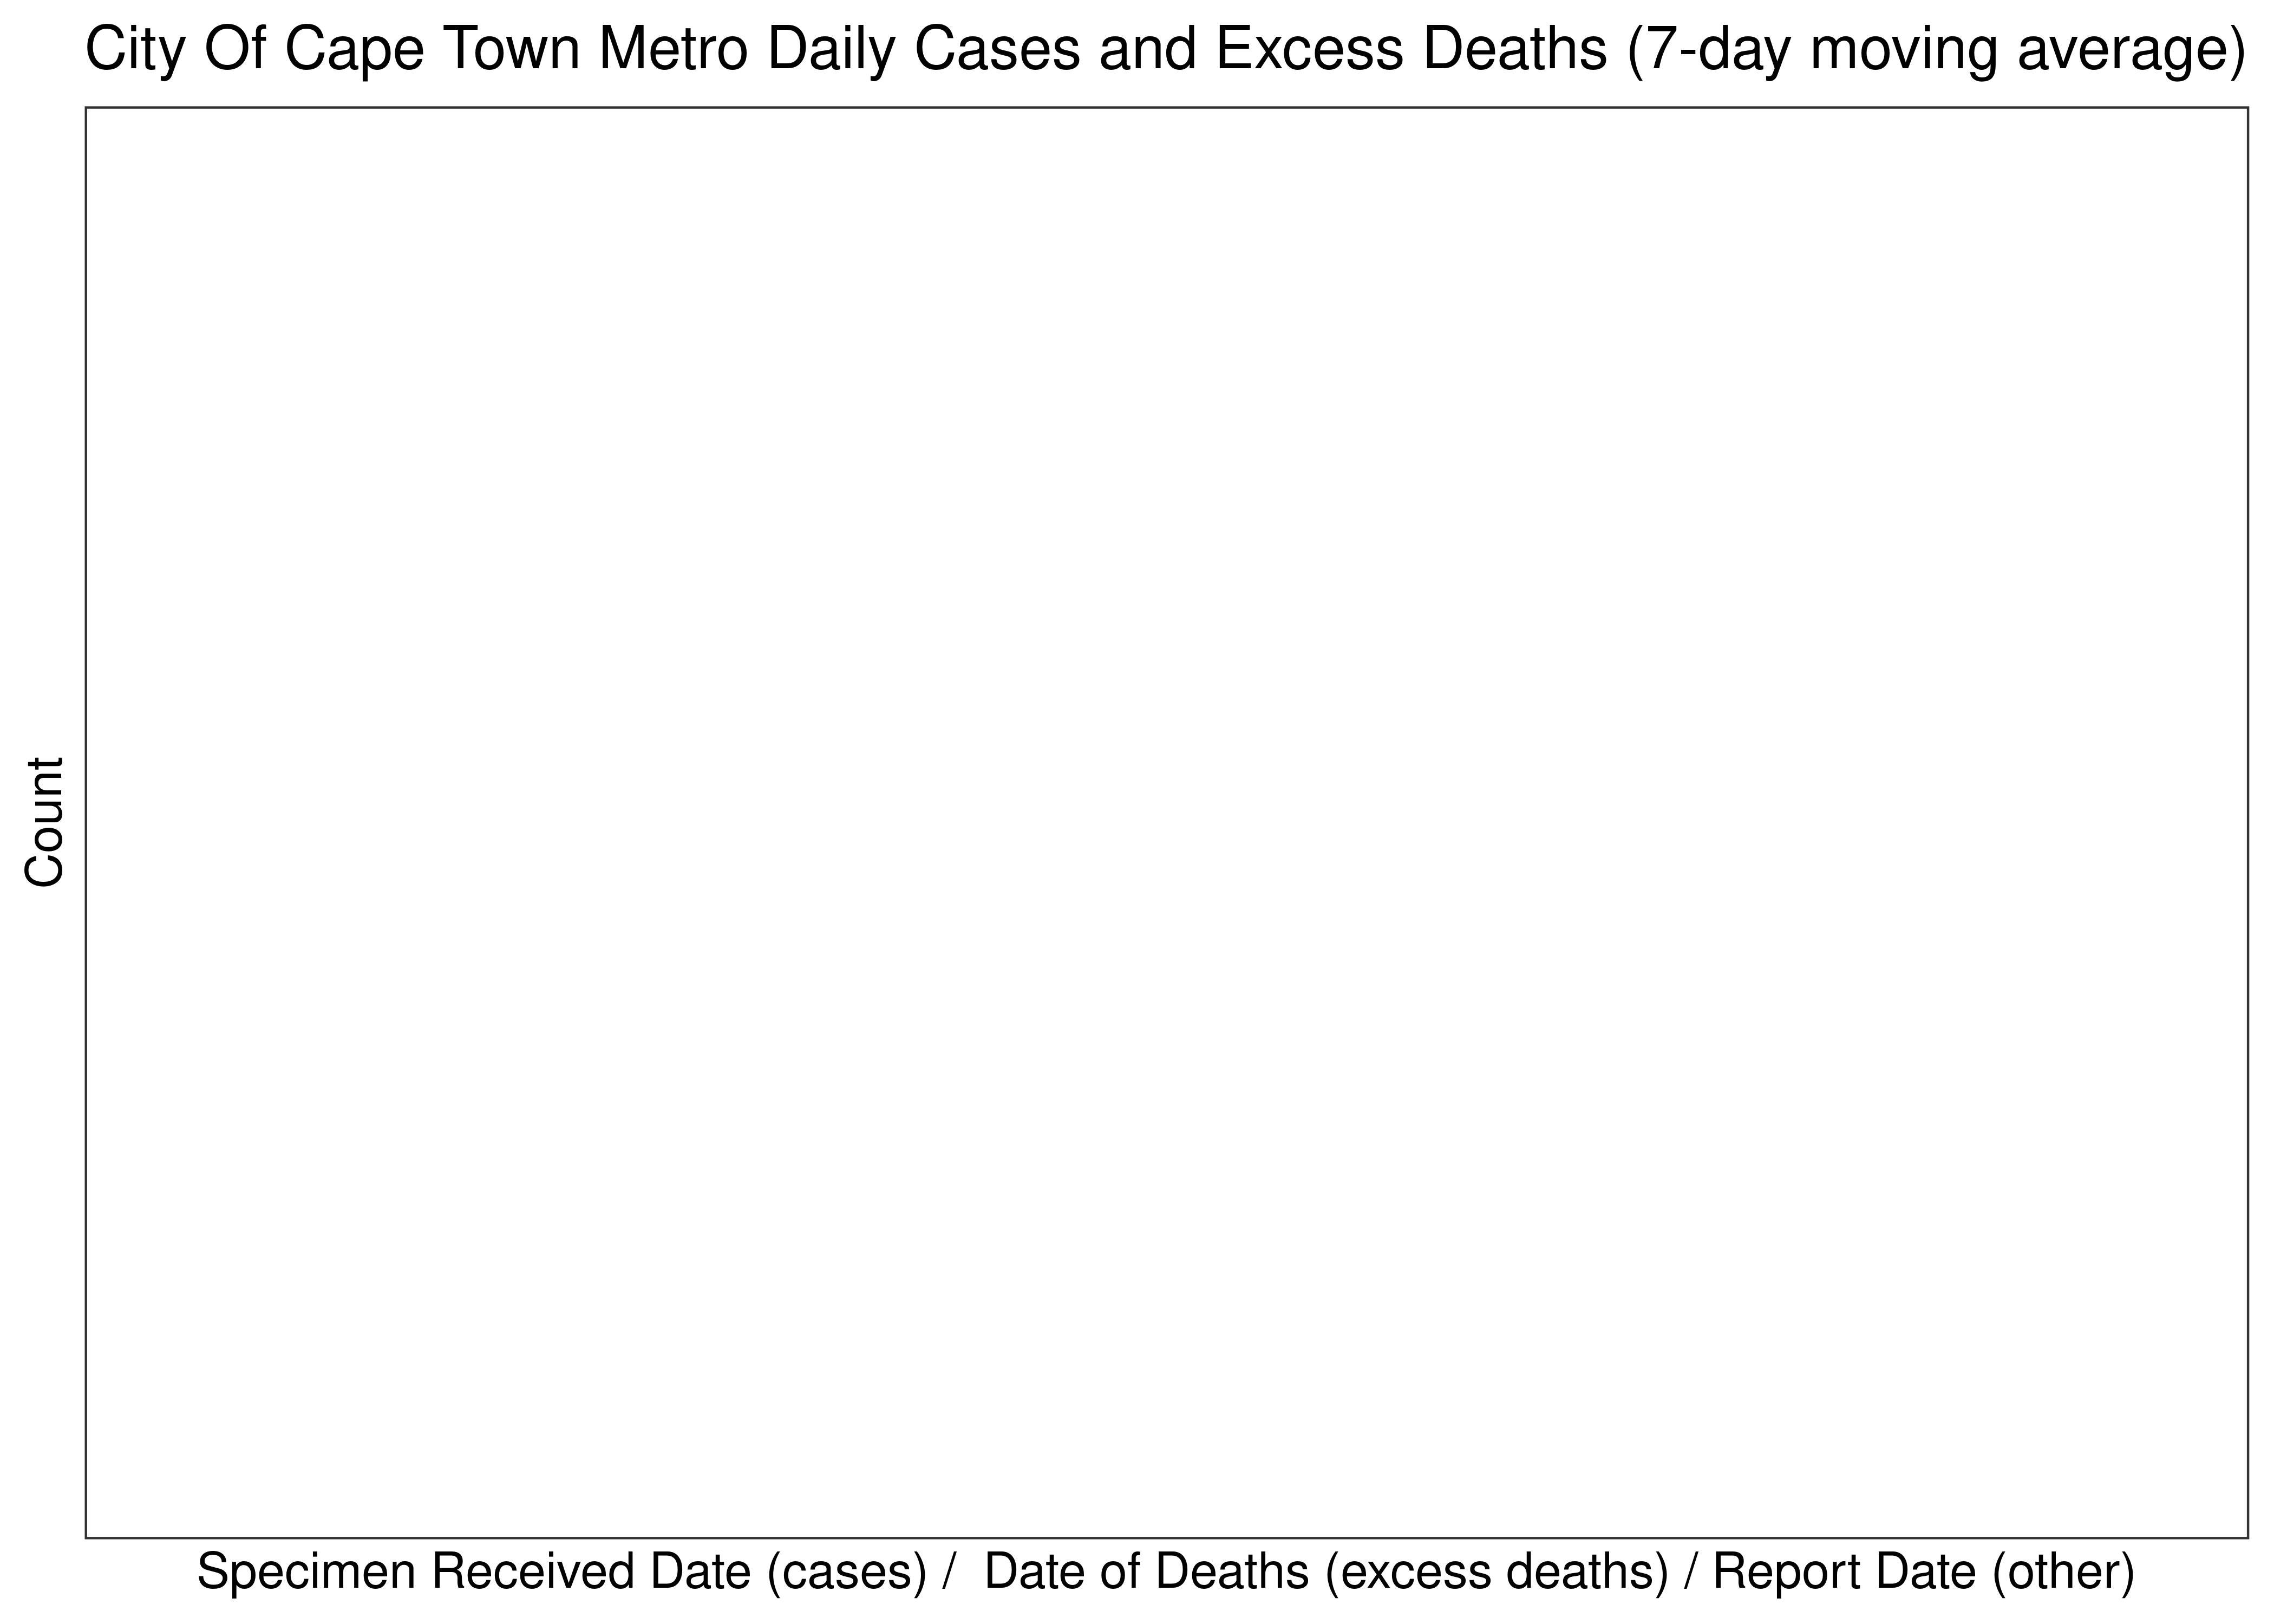 City Of Cape Town Metro Daily Cases and Deaths (if available) for Last 30-days (7-day moving average)